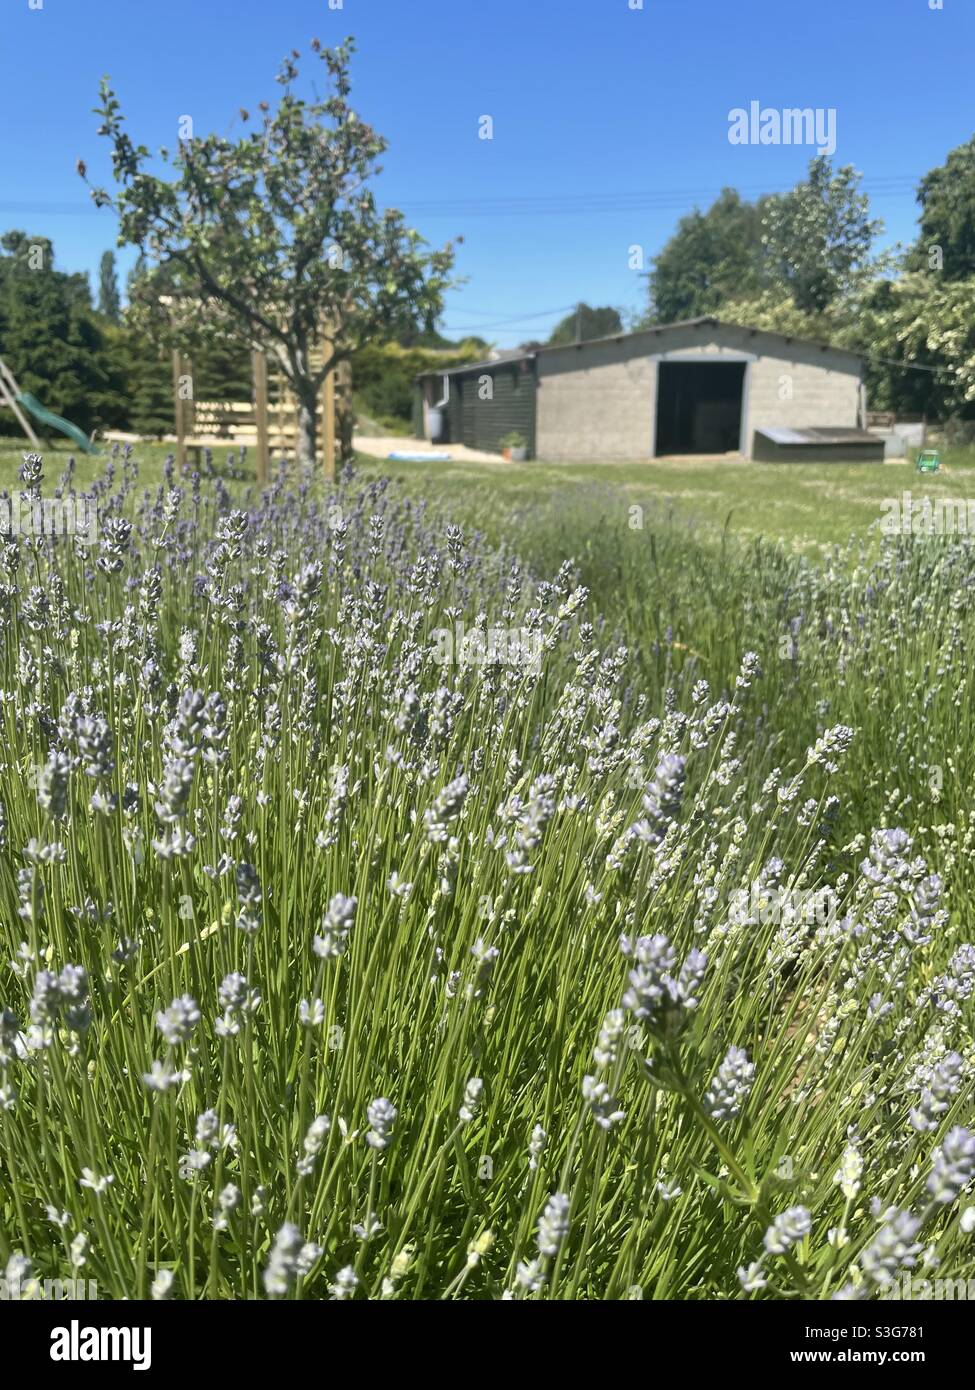 Lavender bed in uk garden with barn in distance Stock Photo